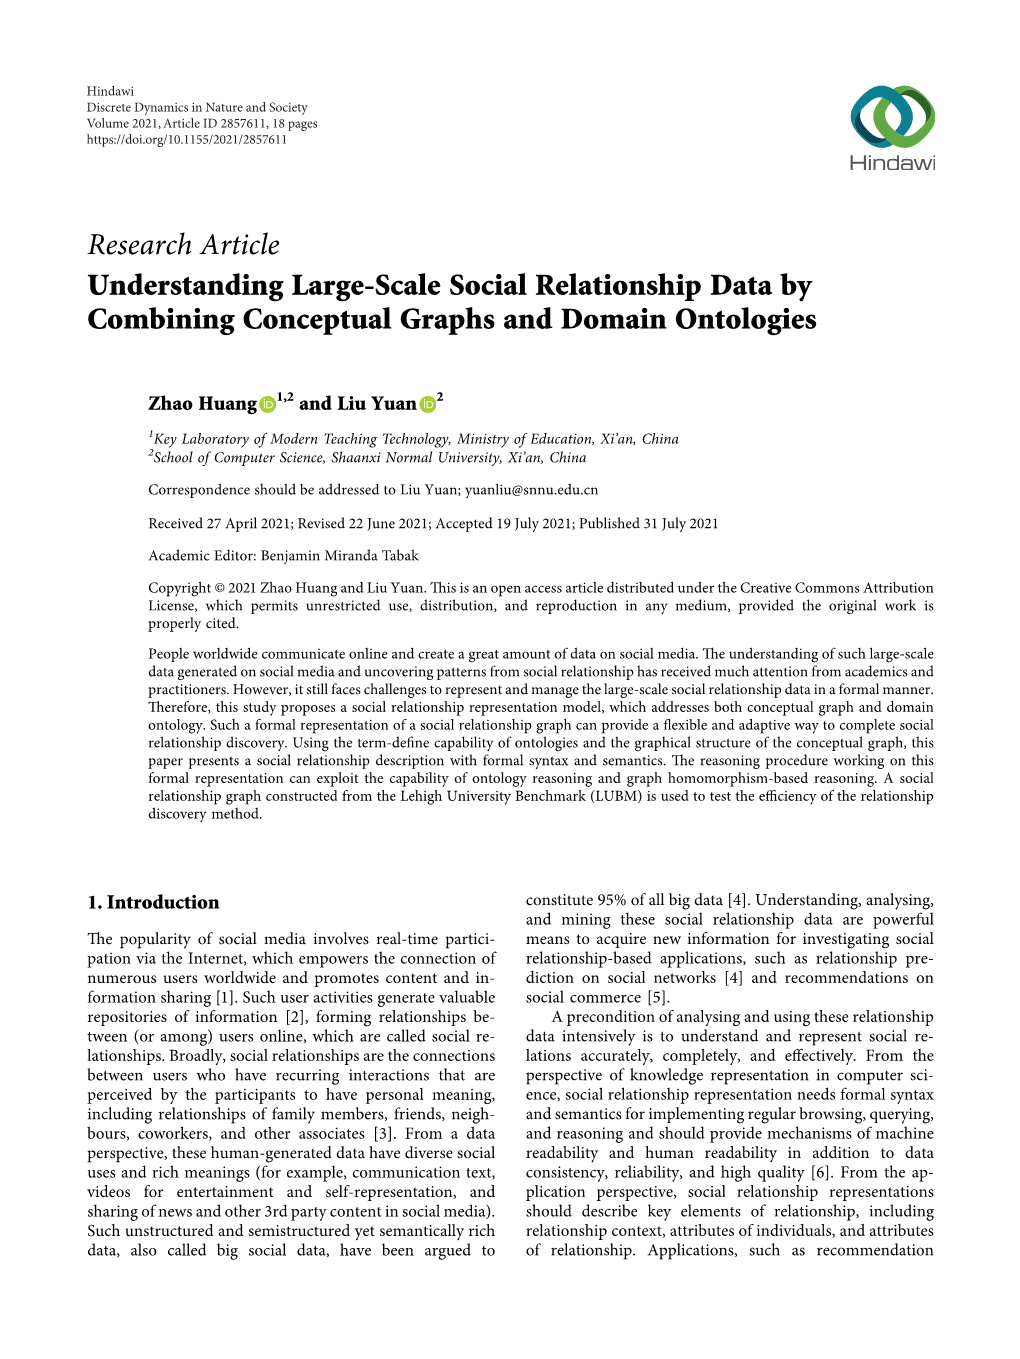 Understanding Large-Scale Social Relationship Data by Combining Conceptual Graphs and Domain Ontologies